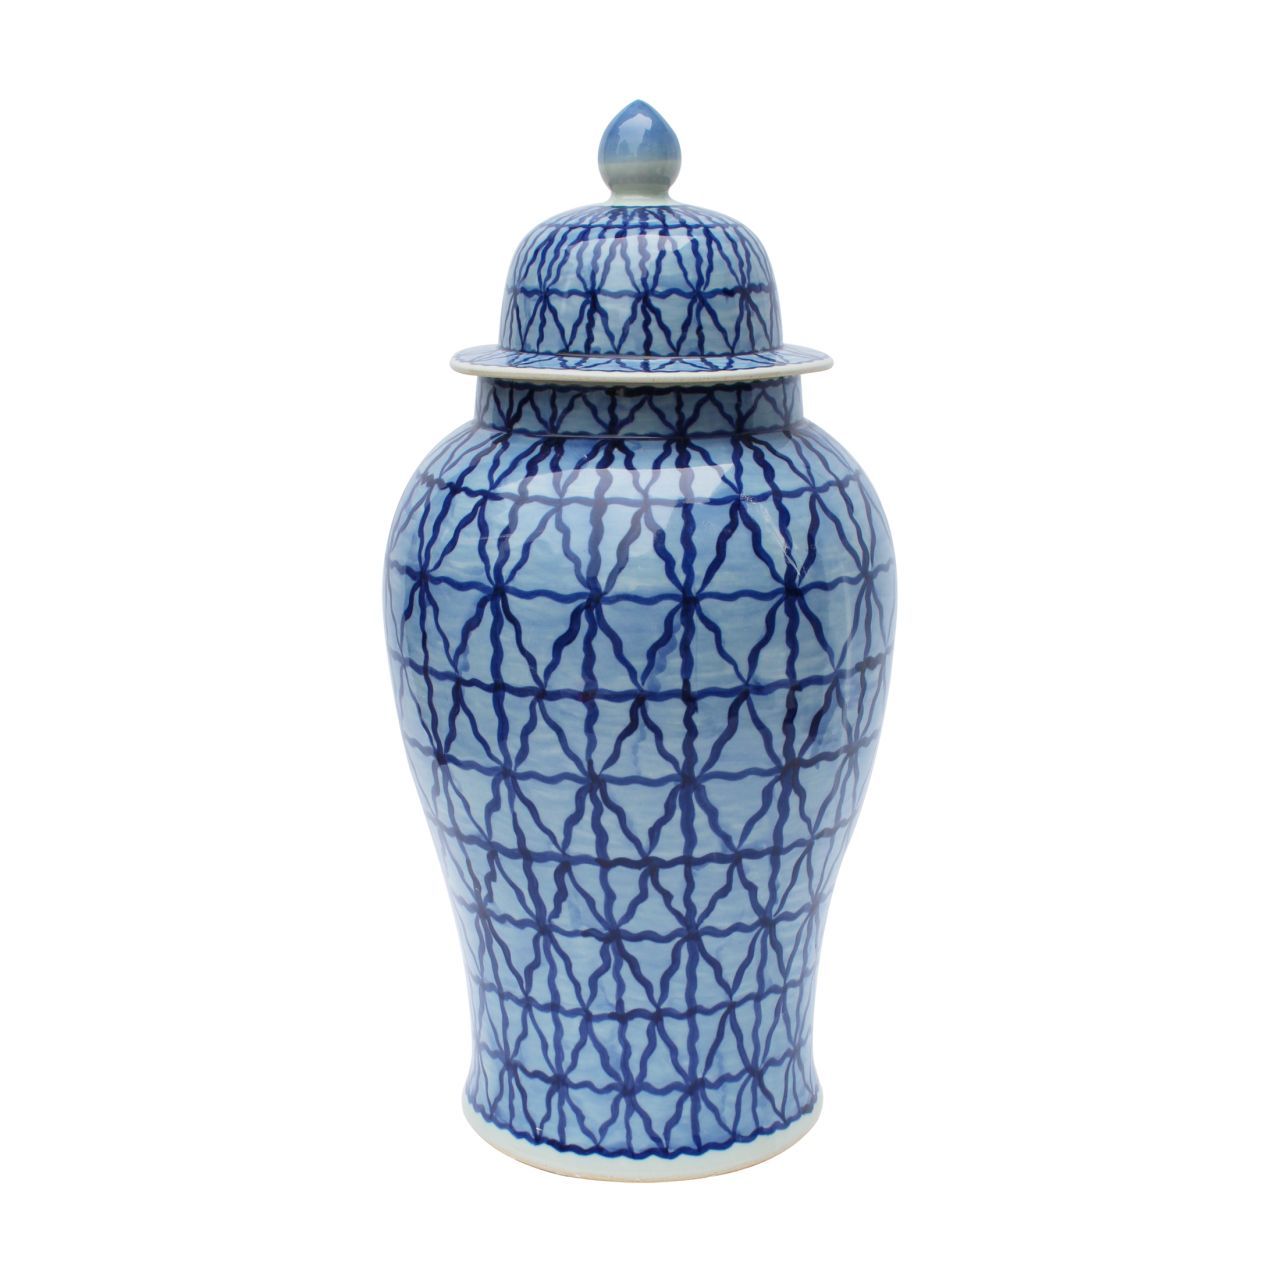 Blue and White Patterned Style Porcelain Temple Jar 24"